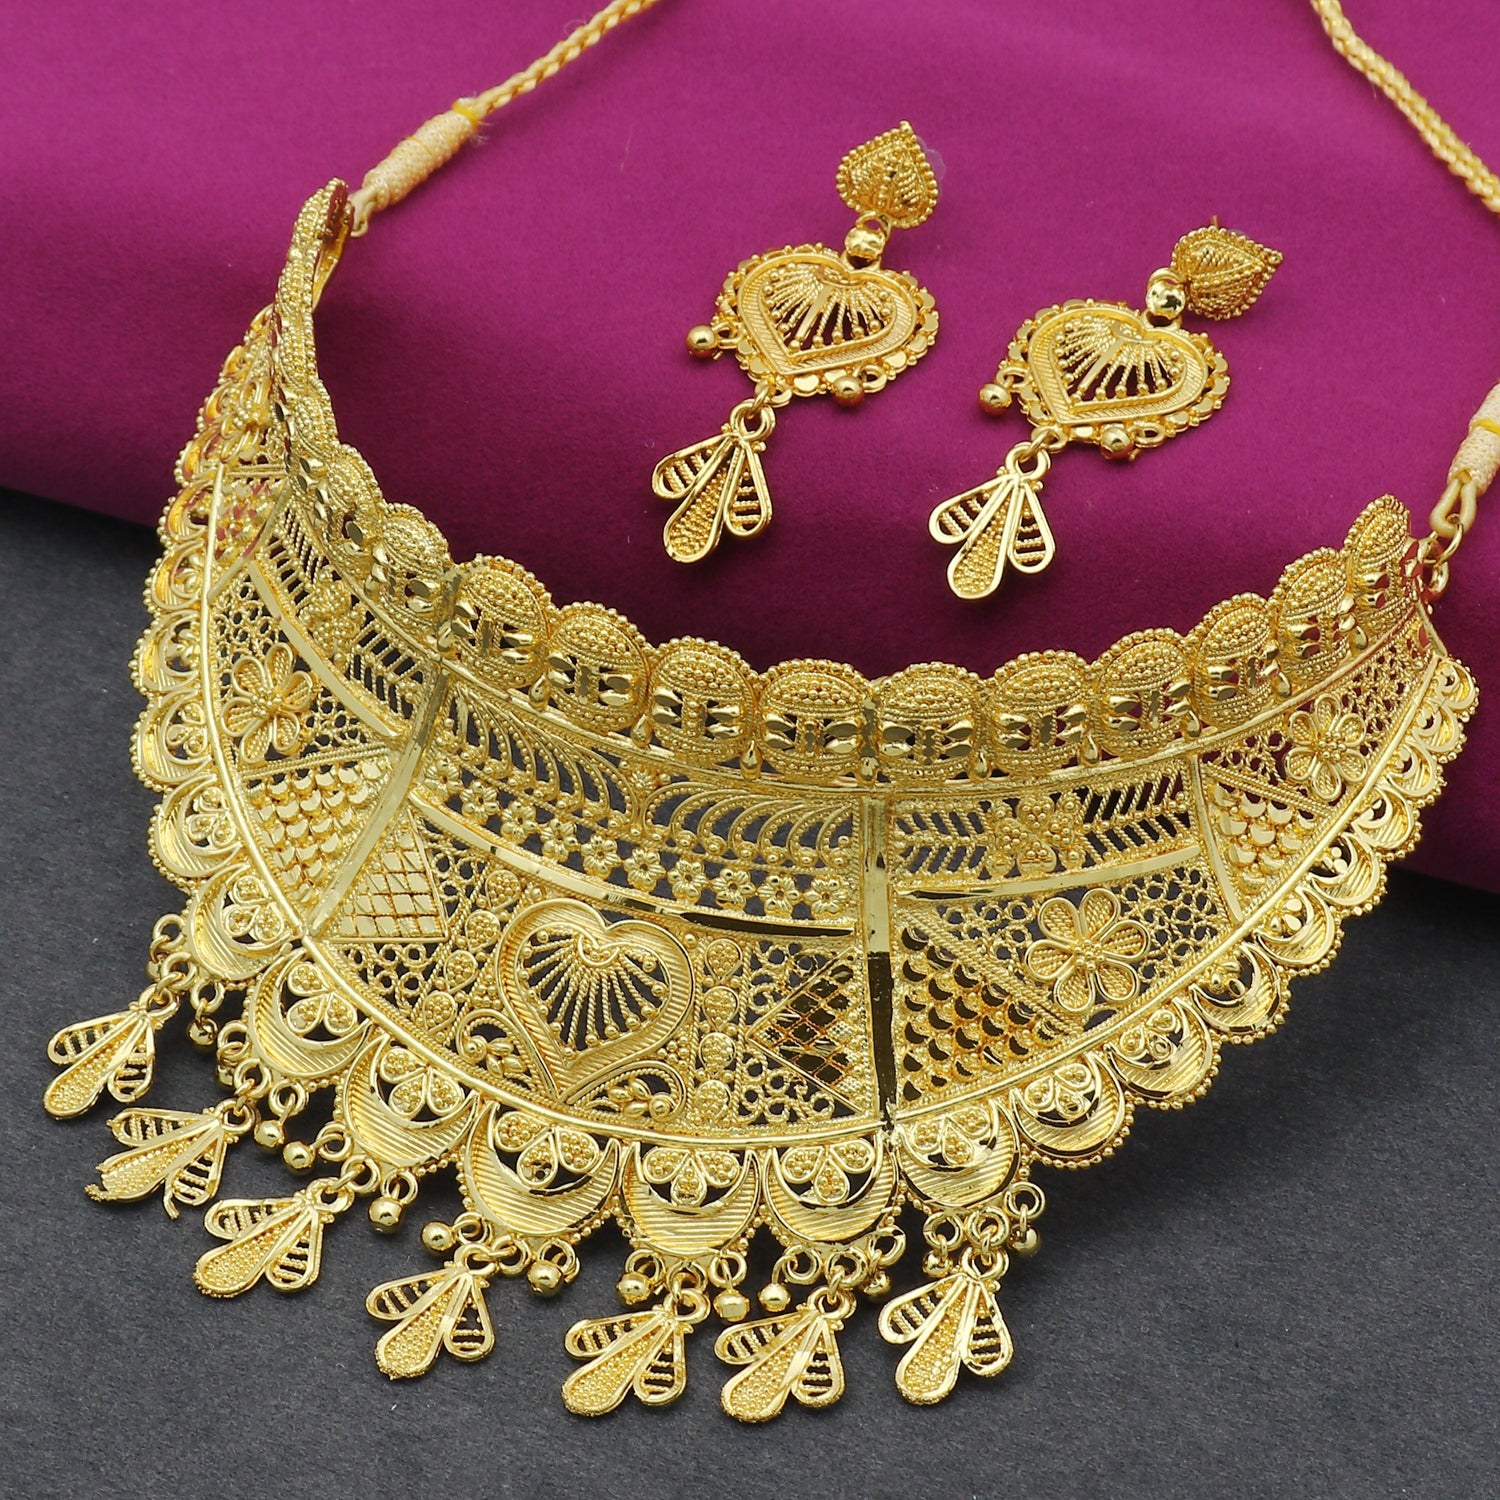 Buy Karatcart Gold Necklace & Earring Set Online At Best Price @ Tata CLiQ